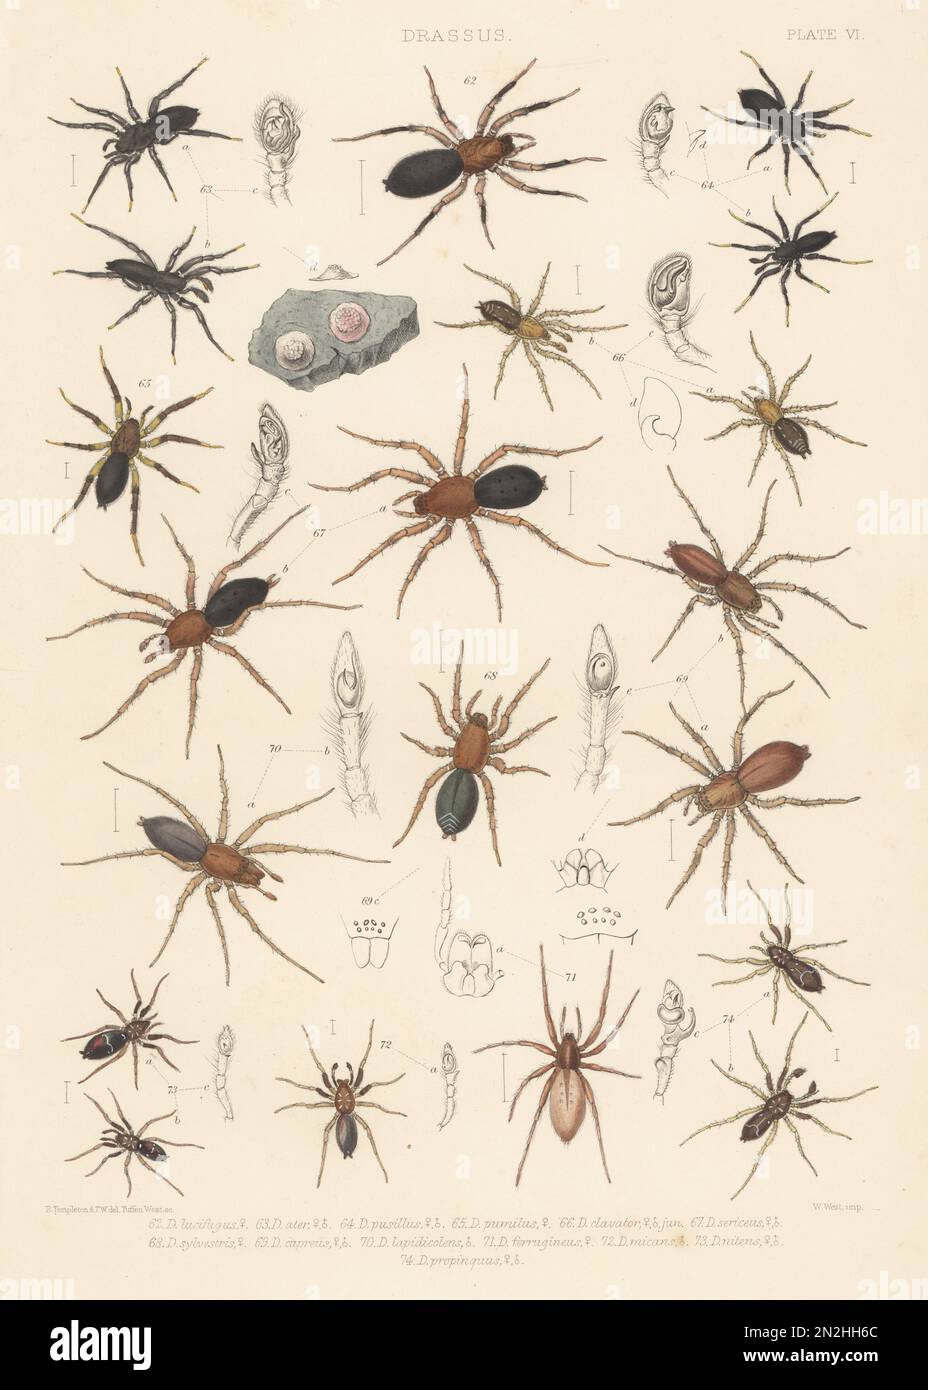 Ground spiders: Gnaphosa lucifuga 62, Zelotes apricorum 63, Drassyllus pusillus 64, Zelotes electus 65, Haplodrassus signifer 66, Scotophaeus blackwalli 67, Haplodrassus silvestris 68, Drassodes cupreus 69, Drassodes lapidosus 70, Micaria pulicaria 71, Drassodes cambridgei 72, Micaria pulicaria 73, and Phrurolithis festivus 74. Handcoloured lithograph by W. West after Robert Templeton and Tuffen West from John Blackwall’s A History of the Spiders of Great Britain and Ireland, Ray Society, London, 1861. Stock Photo